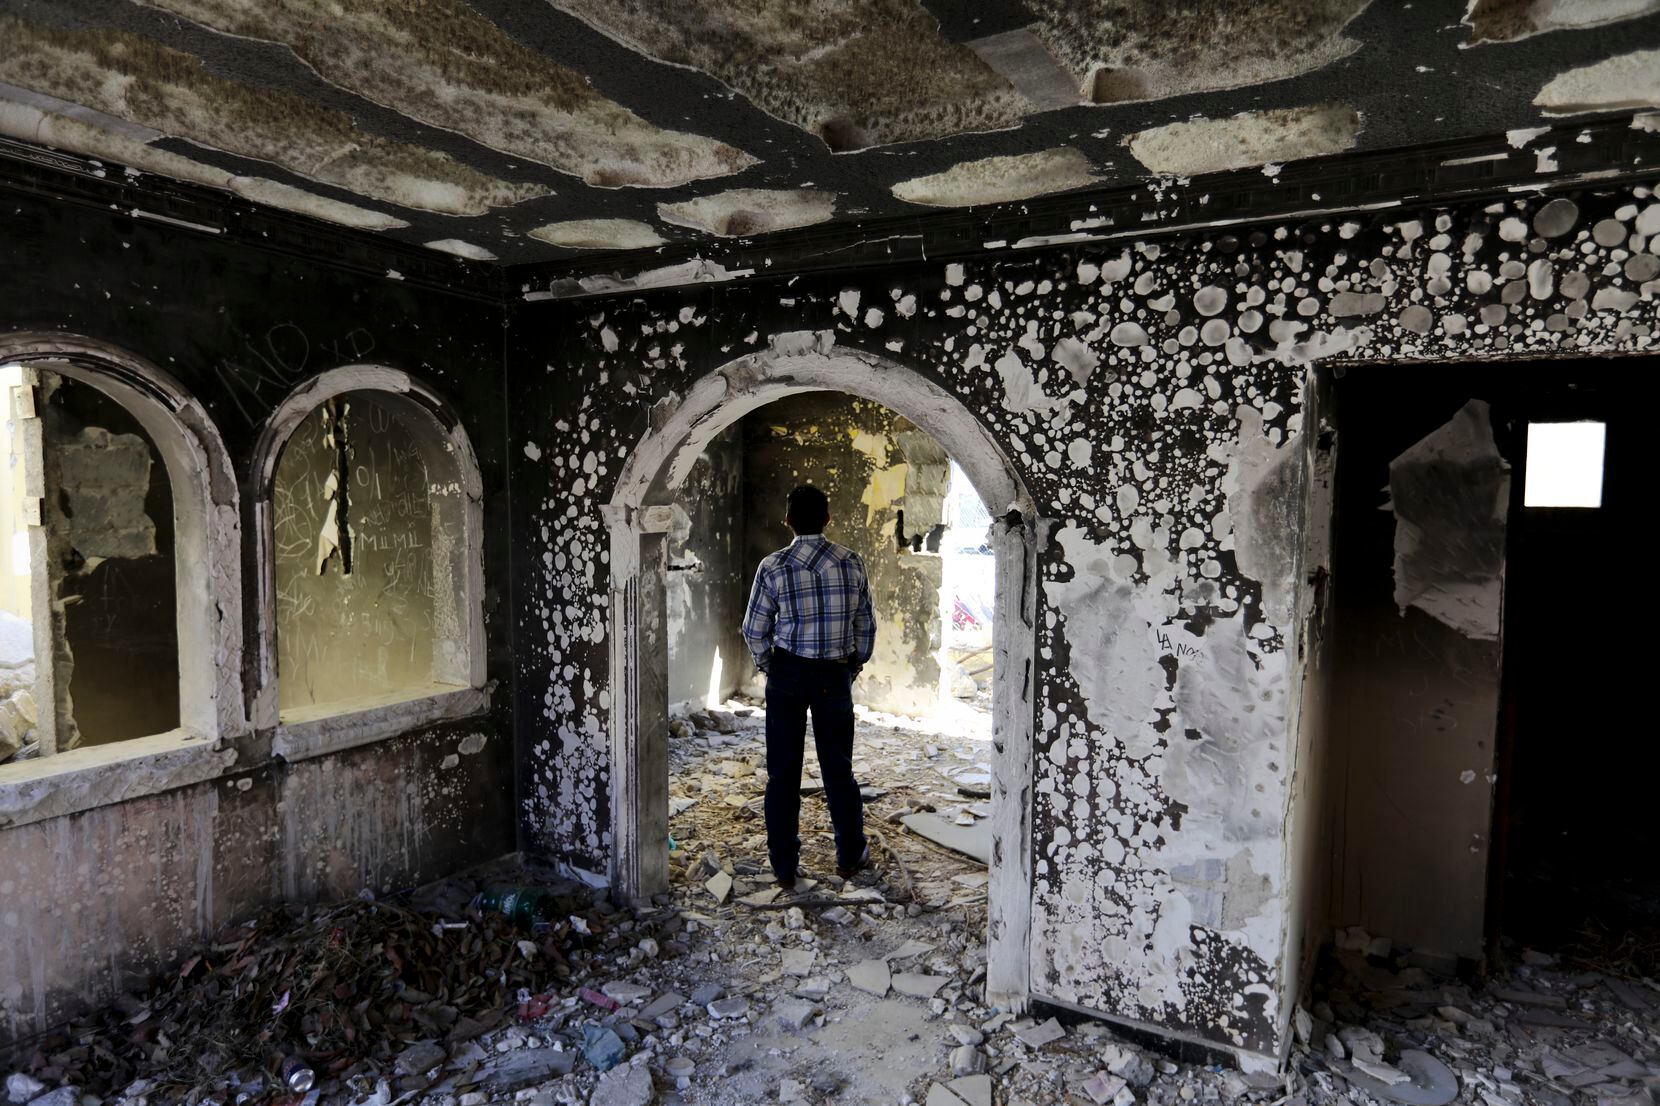 A former policeman in December 2019 walked through an abandoned home that was torched by the Zetas cartel in Allende, Mexico, in 2011 in an act of revenge.